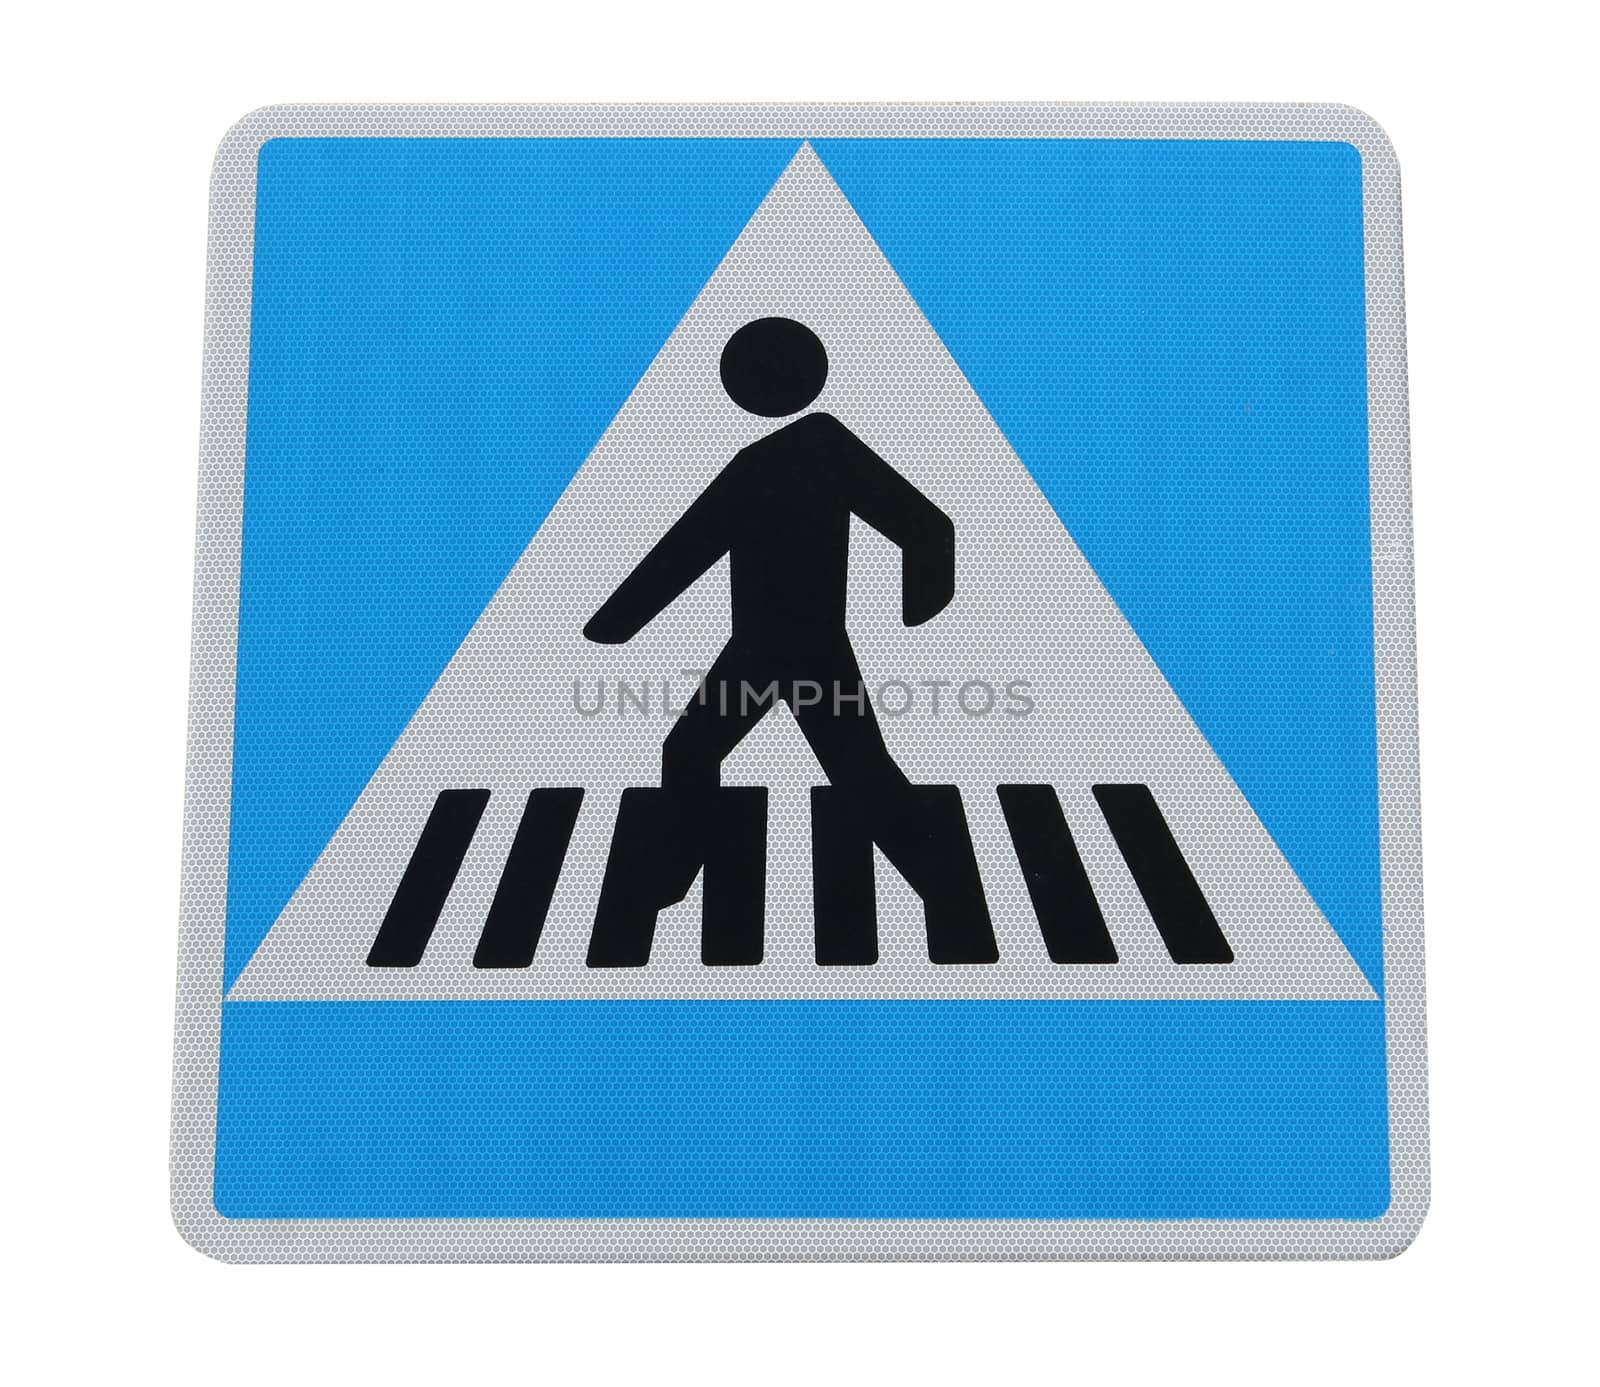 Pedestrian crossing sign isolated on a white background.